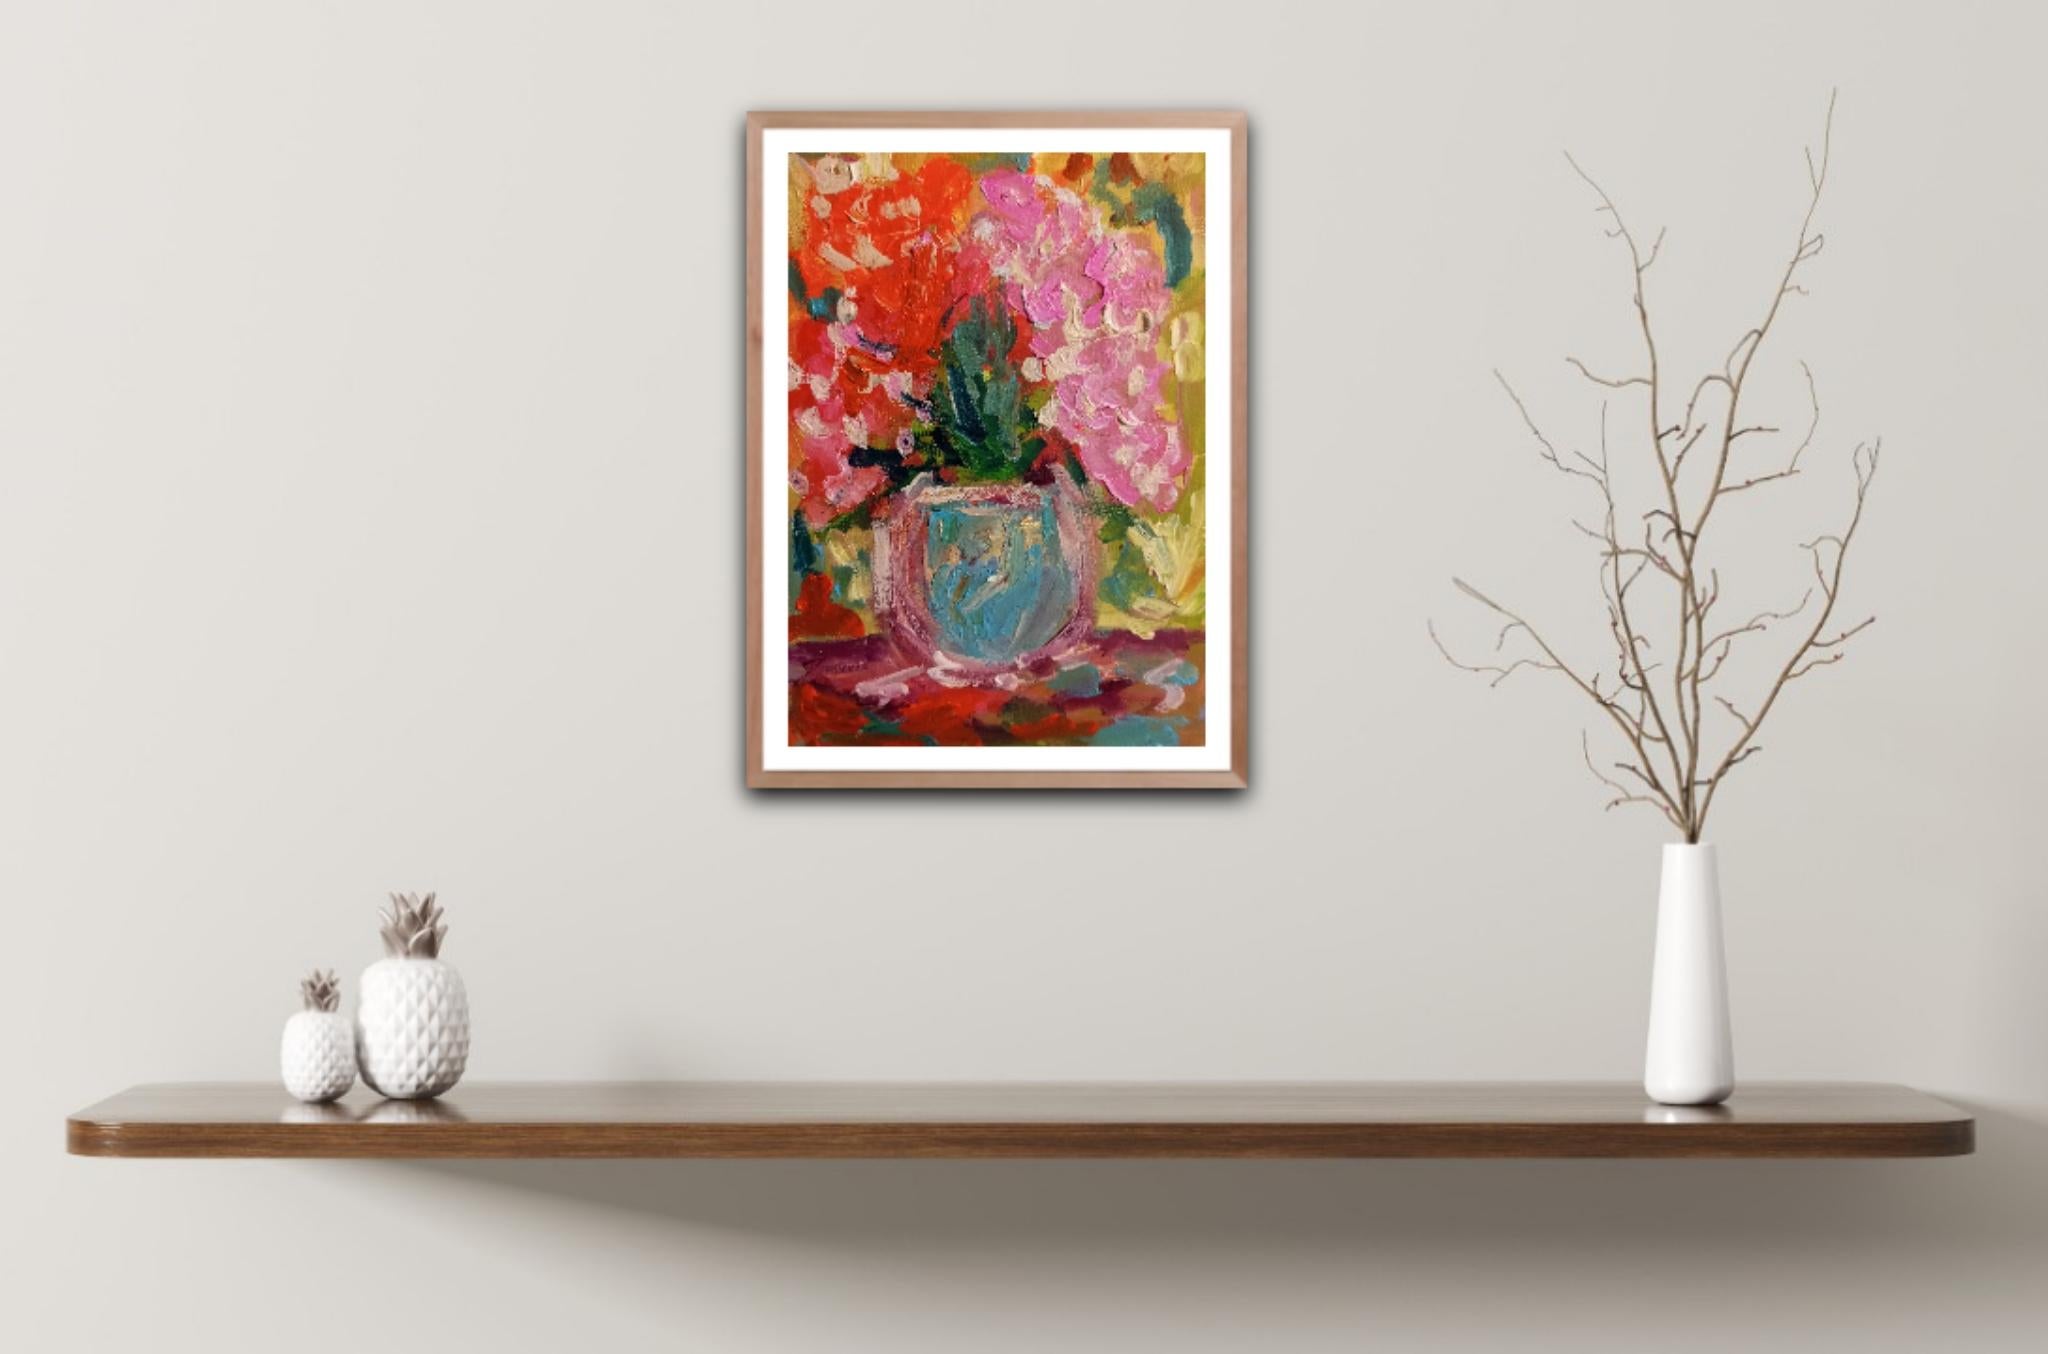 Dear art lover,

This artwork makes part of my series dedicated to the scenes of a summer period.

This floral painting  called 